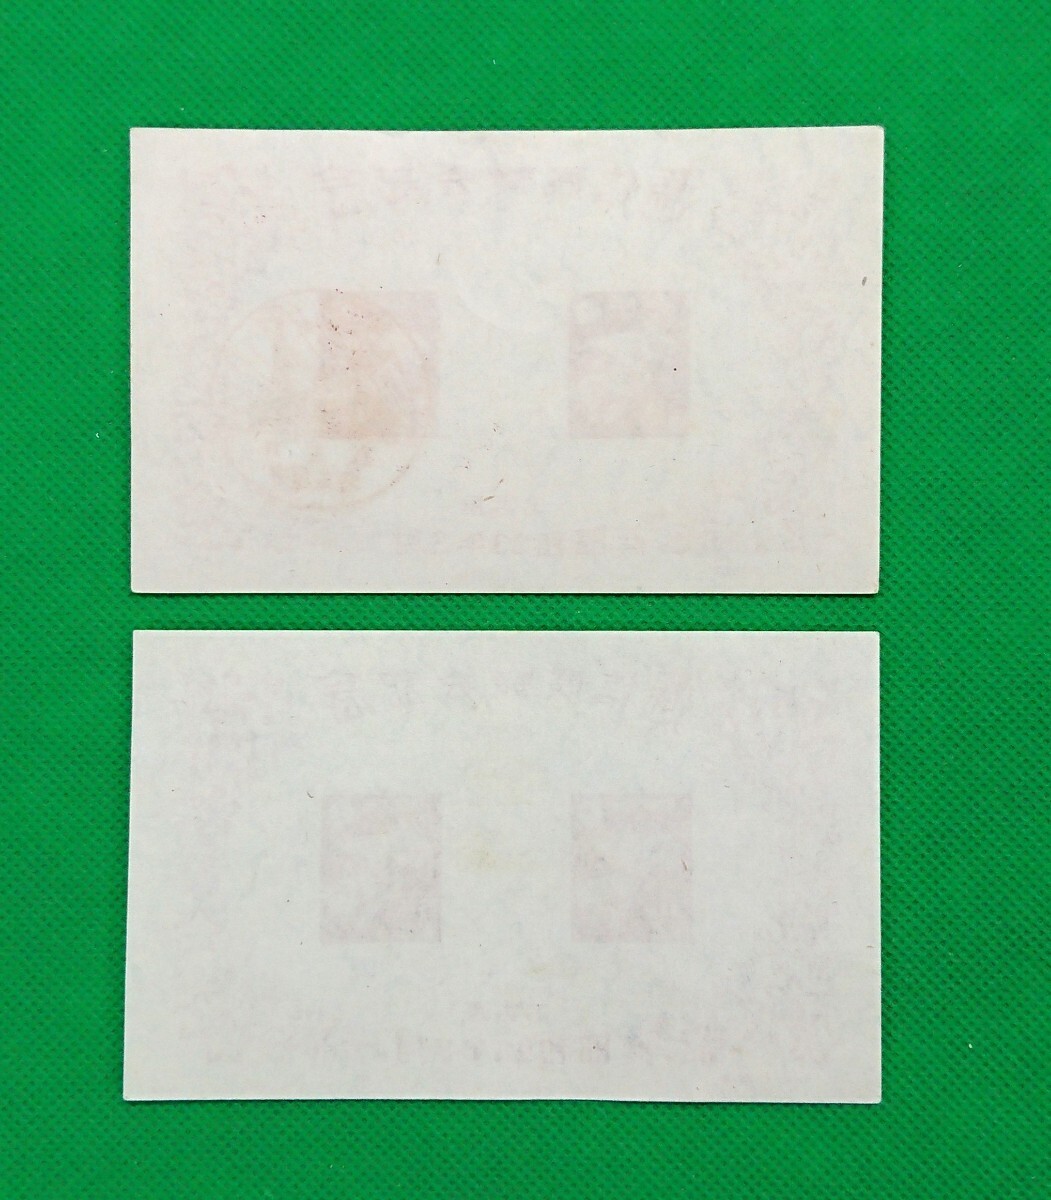  the first day seal stamp / Nagoya . confidence exhibition memory /FDS/ Nagoya centre /. confidence exhibition viewing . memory seal /1948 year / general small size seat / total 2 sheets /NH/ finest quality beautiful goods / some stains less / wrinkle less / seal . clarity /N39